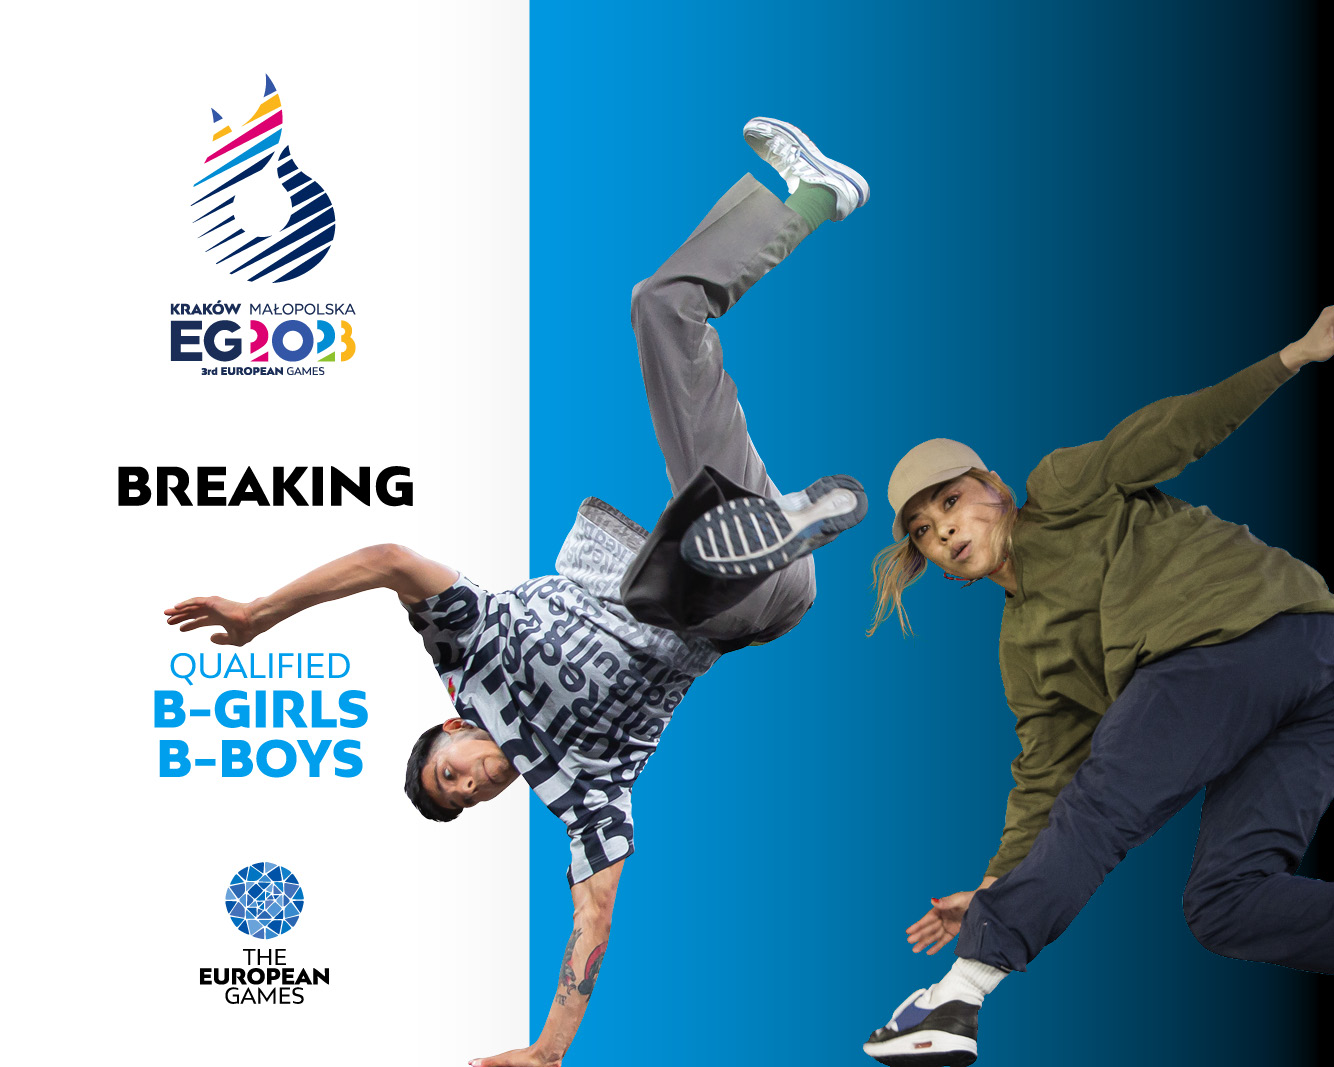 The first eight athletes qualify for breaking’s European Games debut